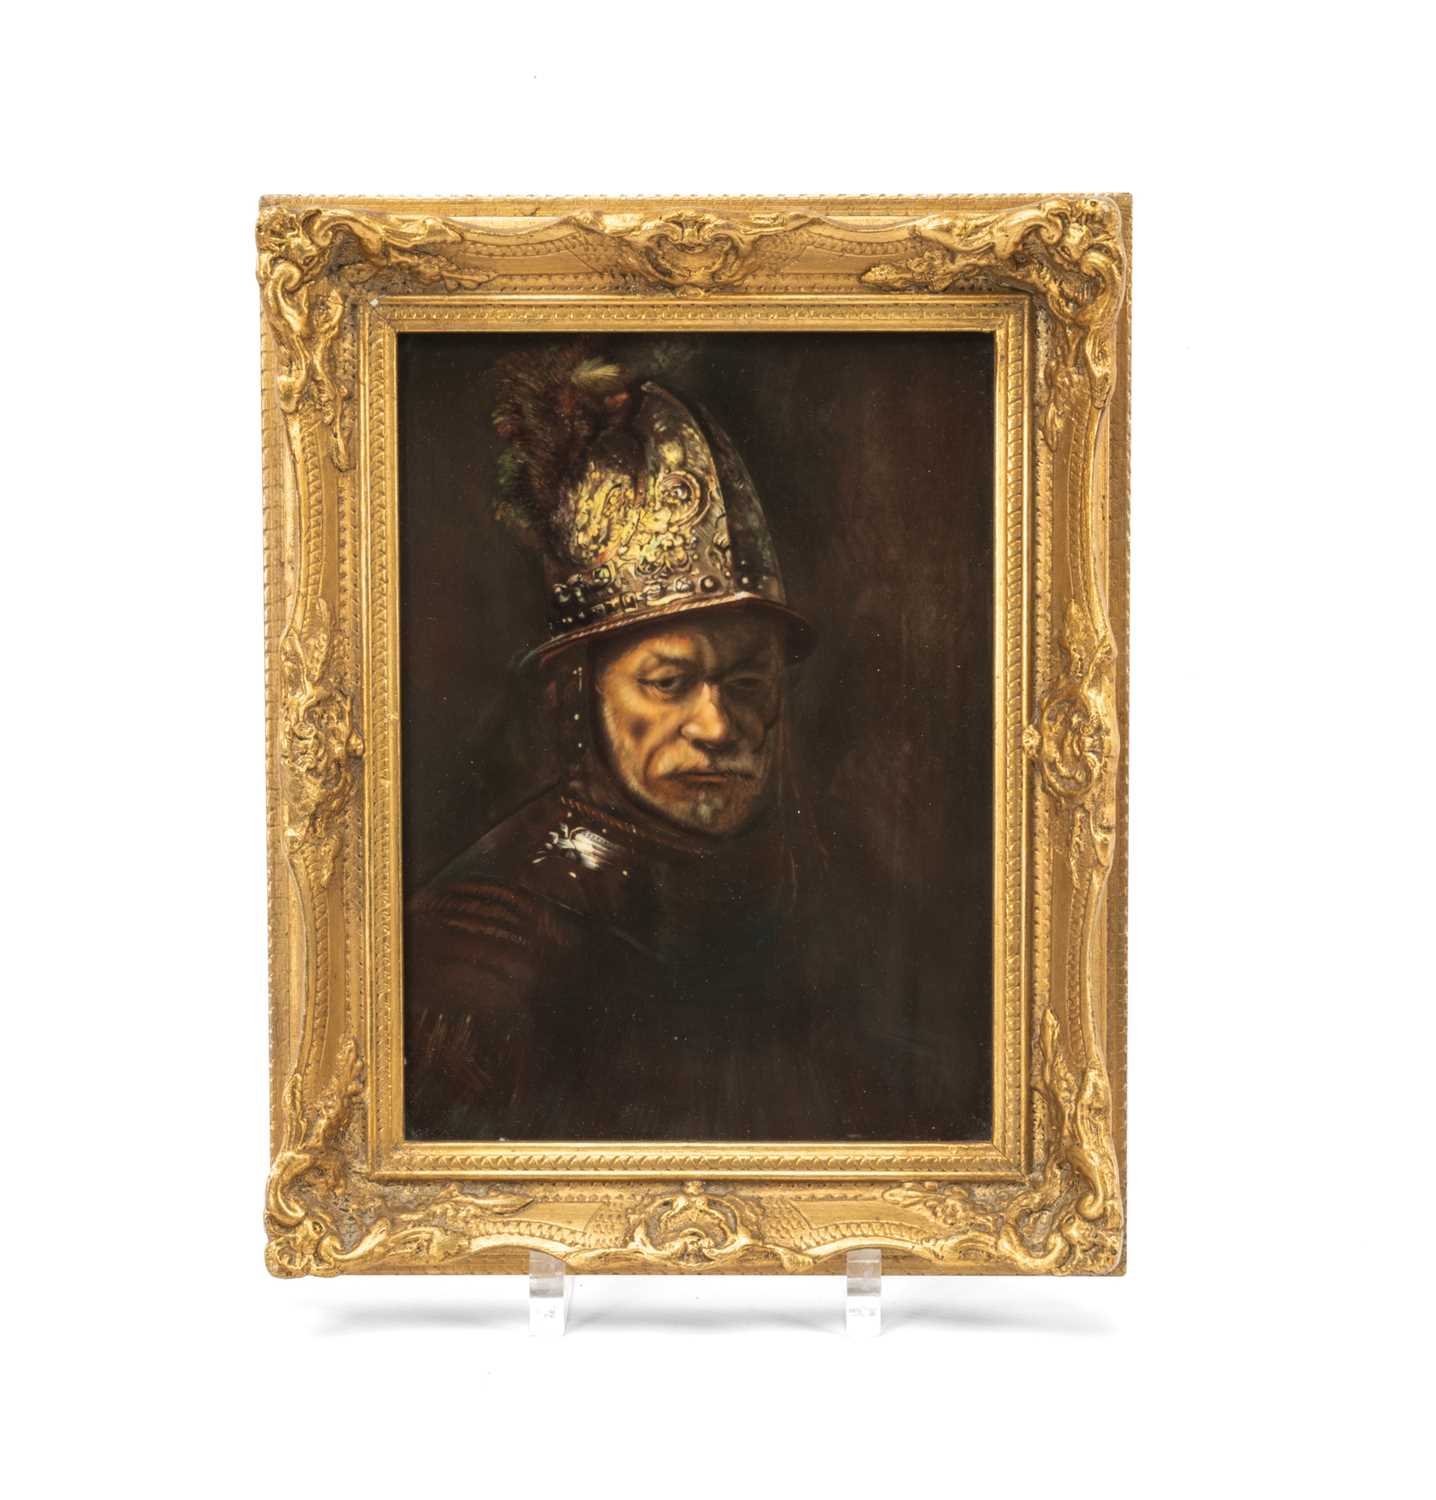 HEINRICH & CO. (SELB) PAINTED PORCELAIN PLAQUE, decorated with "The Man with the Golden Helmet" afer